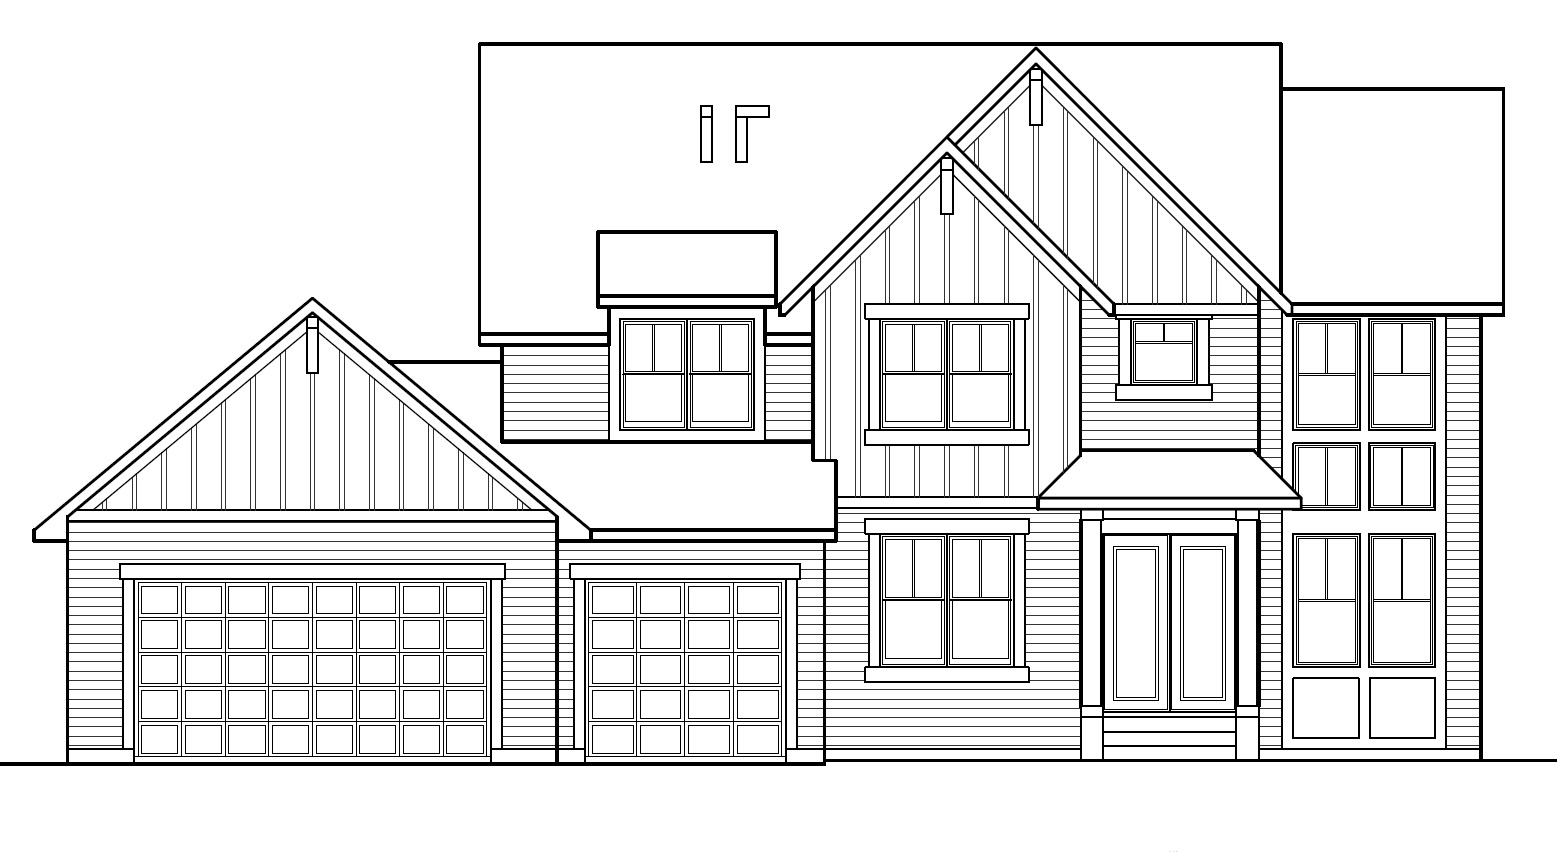 Home Plan #598 Front Elevation